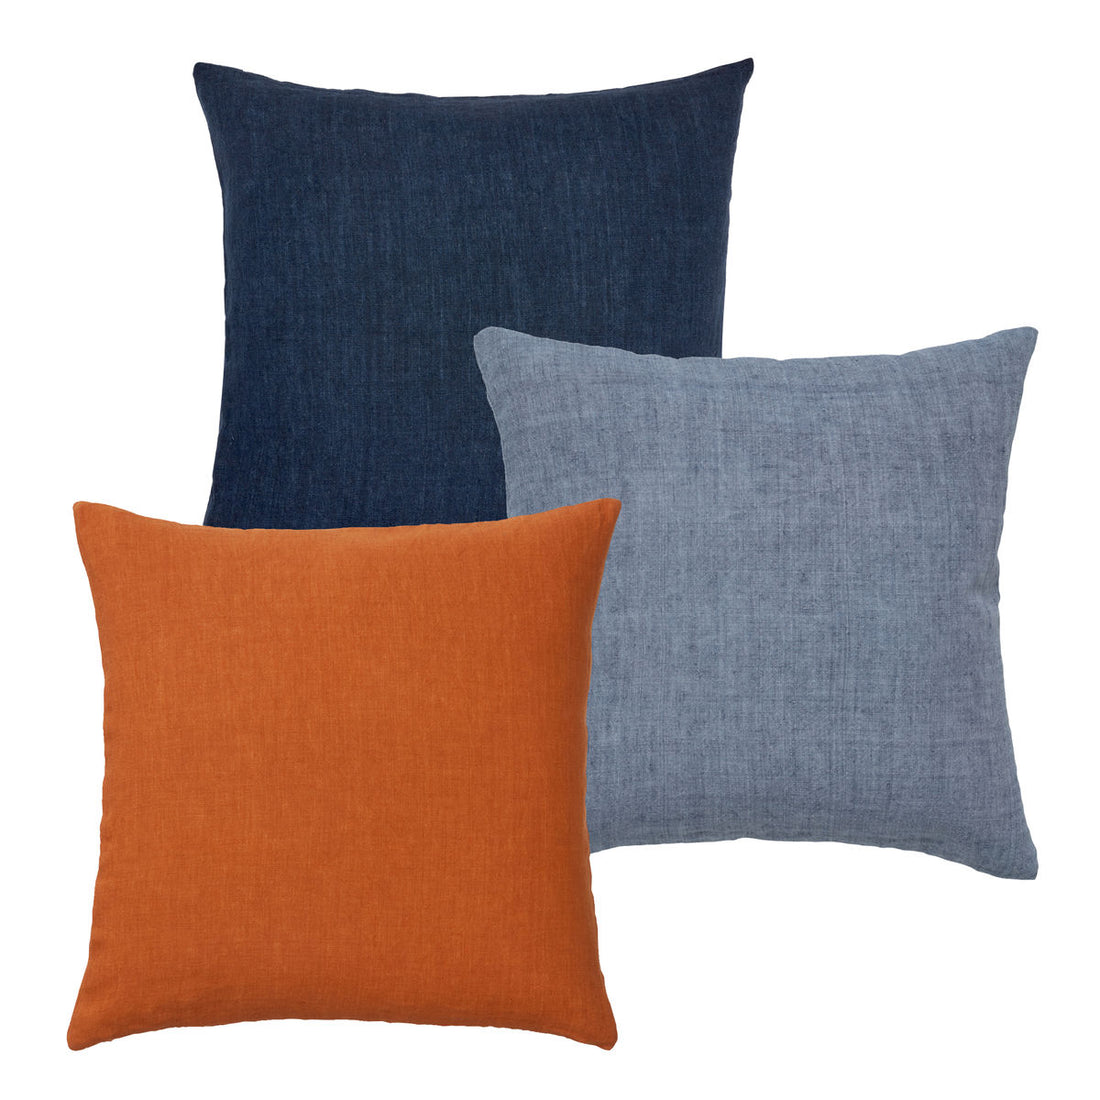 Cozy Living Luxury Linen Cushion Cover Mix